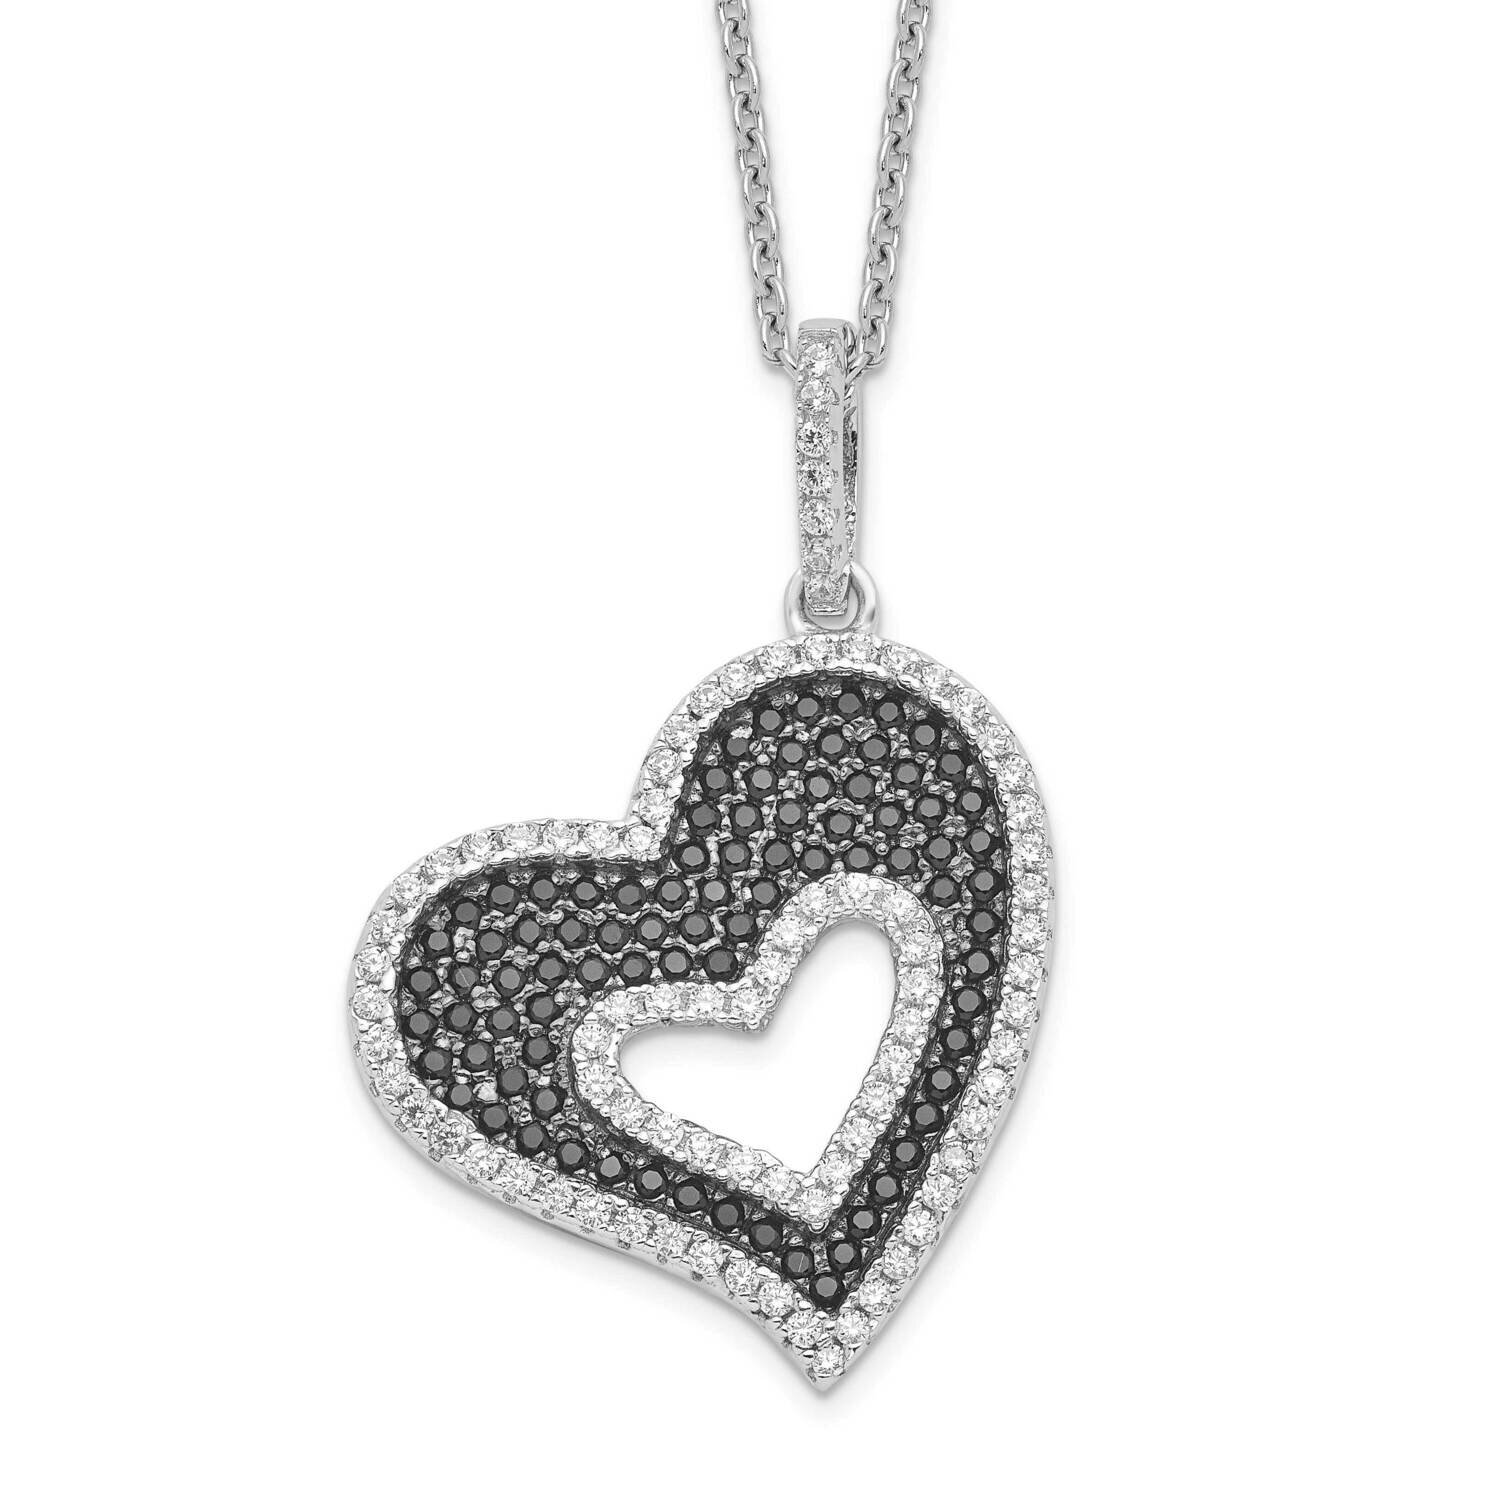 Heart Necklace Sterling Silver Rhodium-plated CZ Diamond QMP793-18